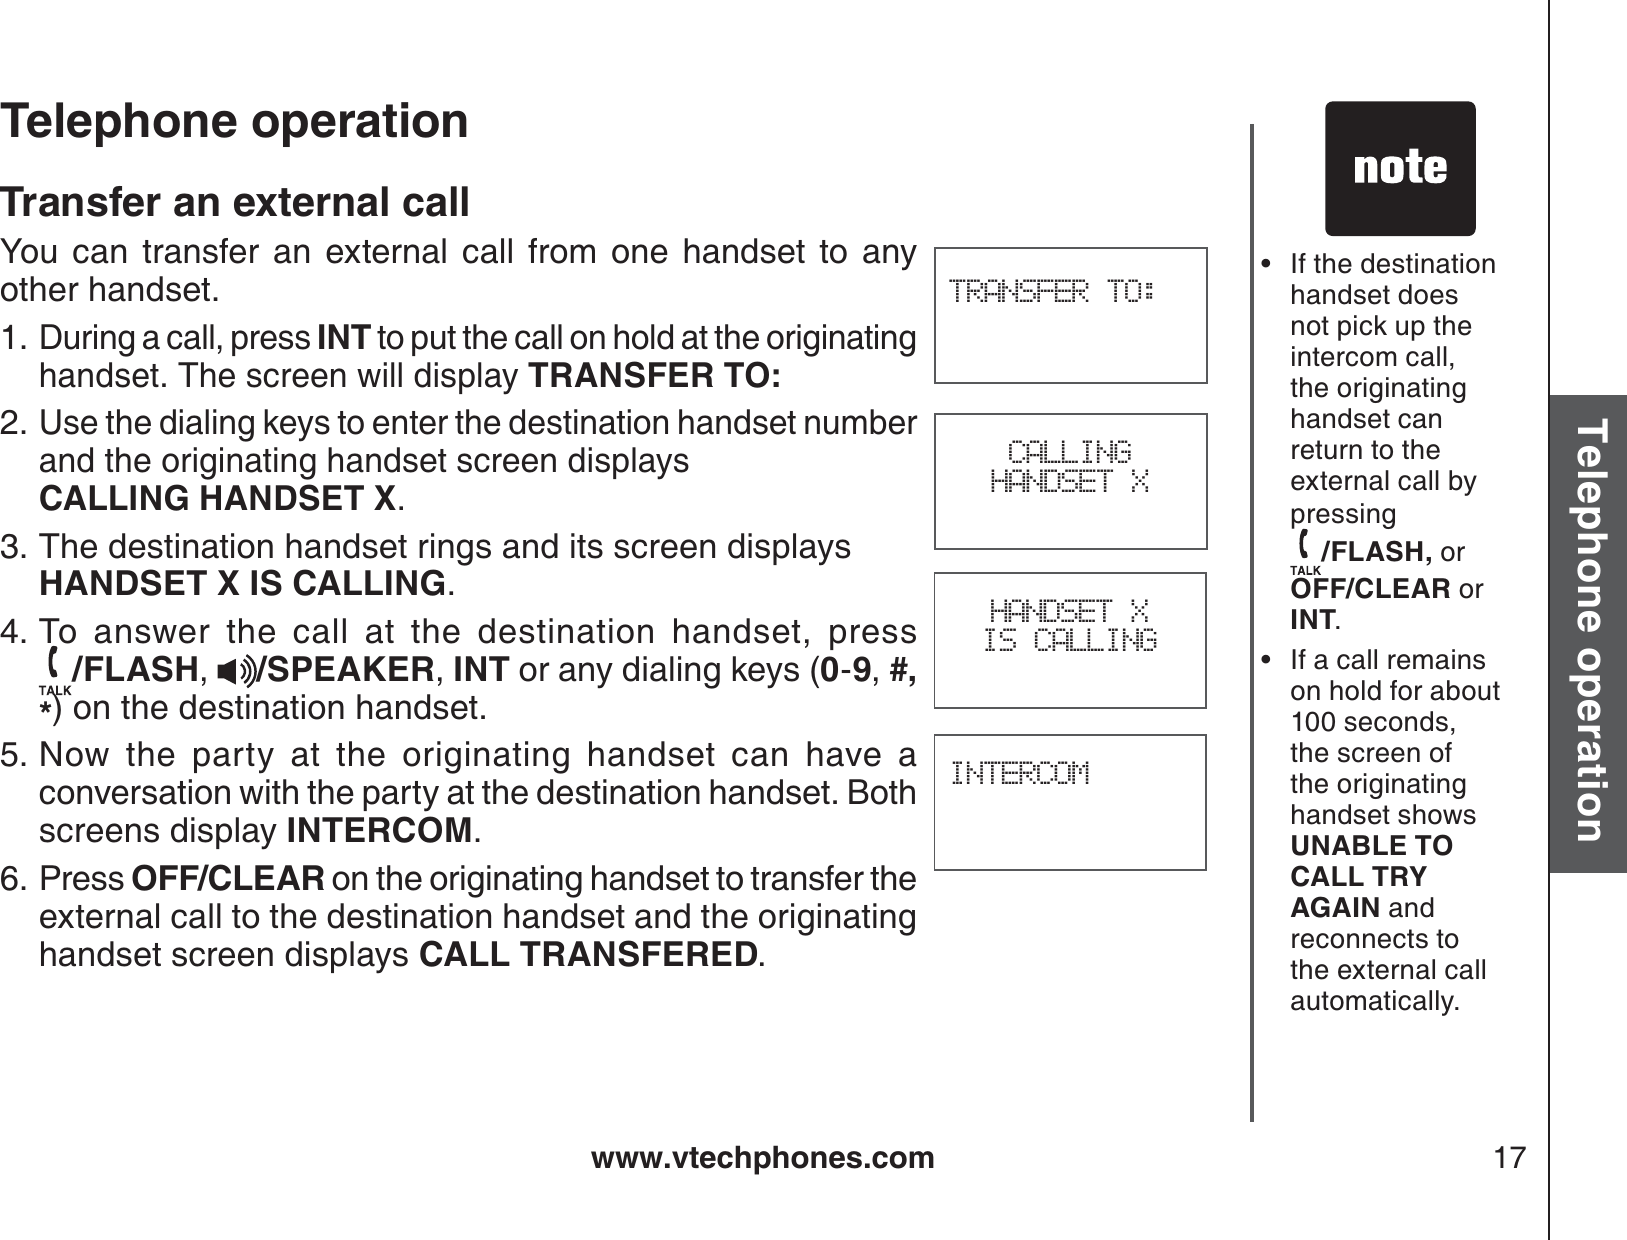 www.vtechphones.com 17Basic operationTelephone operationTelephone operationTransfer an external callYou can transfer an external call from one handset to any other handset. During a call, press INT to put the call on hold at the originating handset. The screen will display TRANSFER TO:Use the dialing keys to enter the destination handset number and the originating handset screen displays    CALLING HANDSET X.The destination handset rings and its screen displays HANDSET X IS CALLING.To answer the call at the destination handset, press                /FLASH,/SPEAKER,INT or any dialing keys (0-9,#,*) on the destination handset.Now the party at the originating handset can have a conversation with the party at the destination handset. Both screens display INTERCOM.Press OFF/CLEAR on the originating handset to transfer the external call to the destination handset and the originating handset screen displays CALL TRANSFERED.1.2.3.4.5.6.If the destination handset does not pick up the intercom call, the originating handset can return to the external call by pressing /FLASH, orOFF/CLEAR or INT.If a call remains on hold for about 100 seconds, the screen of the originating handset shows UNABLE TO CALL TRY AGAIN and reconnects to the external call automatically. ••TRANSFER TO:INTERCOMHANDSET X IS CALLINGCALLINGHANDSET X